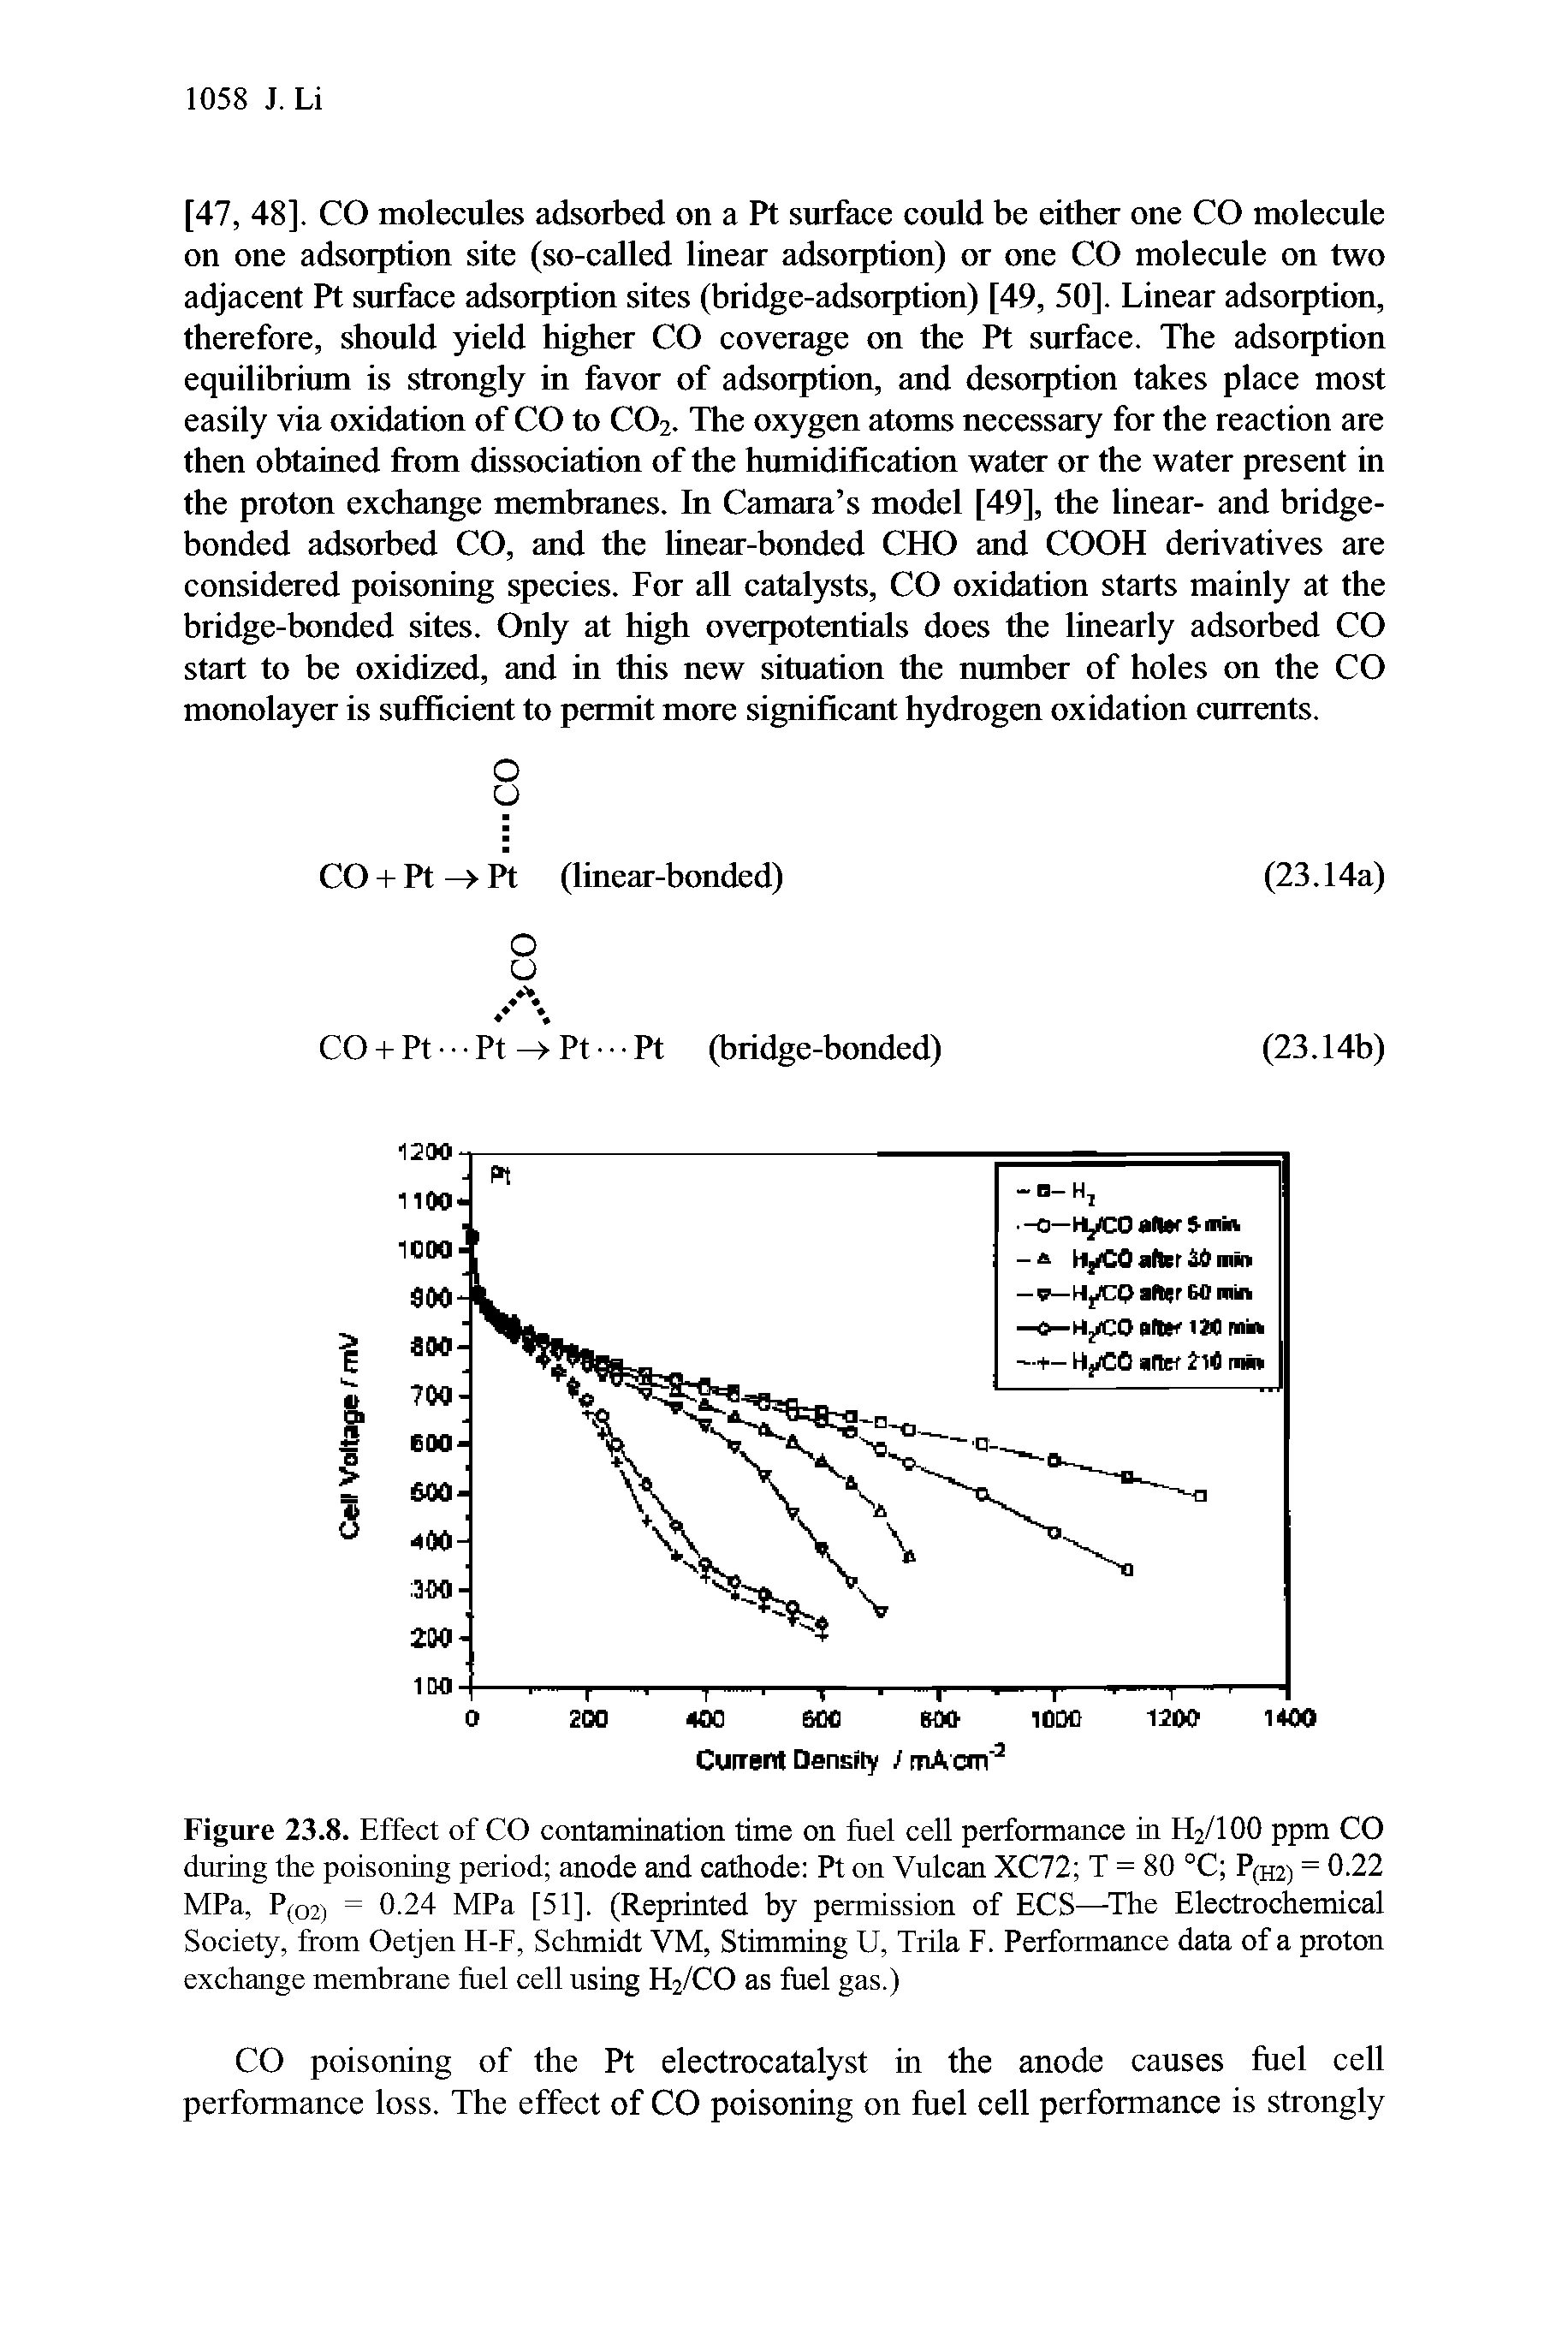 Figure 23.8. Effect of CO contamination time on fuel cell performance in H2/IOO ppm CO during the poisoning period anode and cathode Pt on Vulcan XC72 T = 80 °C P(h2) = 0.22 MPa, P(02) = 0.24 MPa [51]. (Reprinted by permission of ECS— The Electrochemical Society, from Oetjen H-F, Schmidt VM, Stimming U, Trila F. Performance data of a proton exchange membrane fuel cell using H2/CO as fuel gas.)...